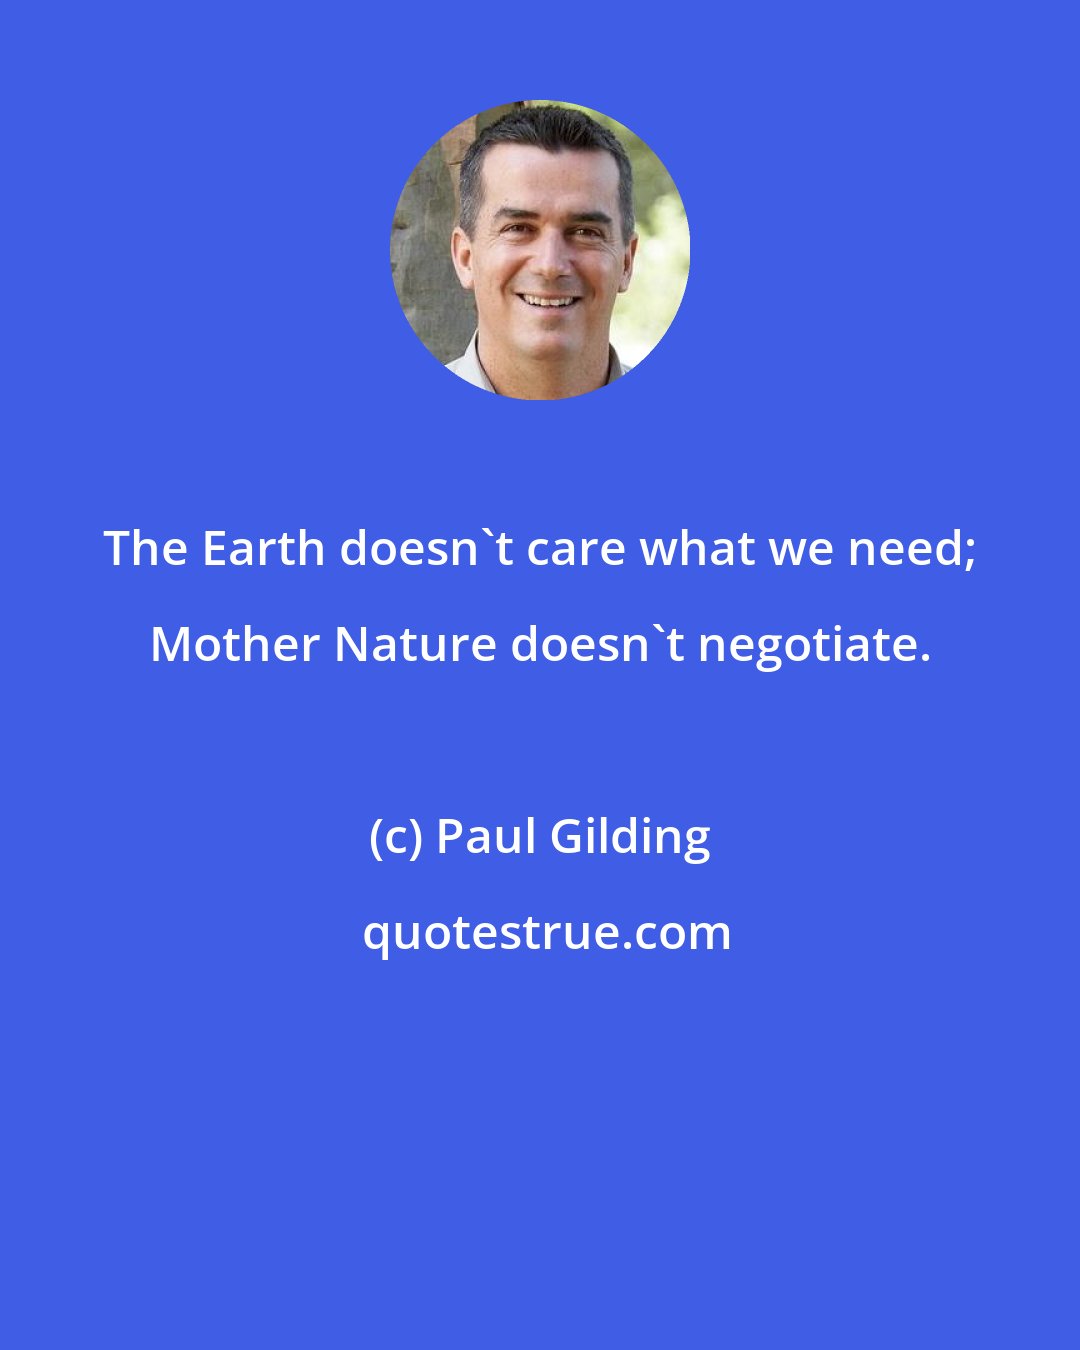 Paul Gilding: The Earth doesn't care what we need; Mother Nature doesn't negotiate.